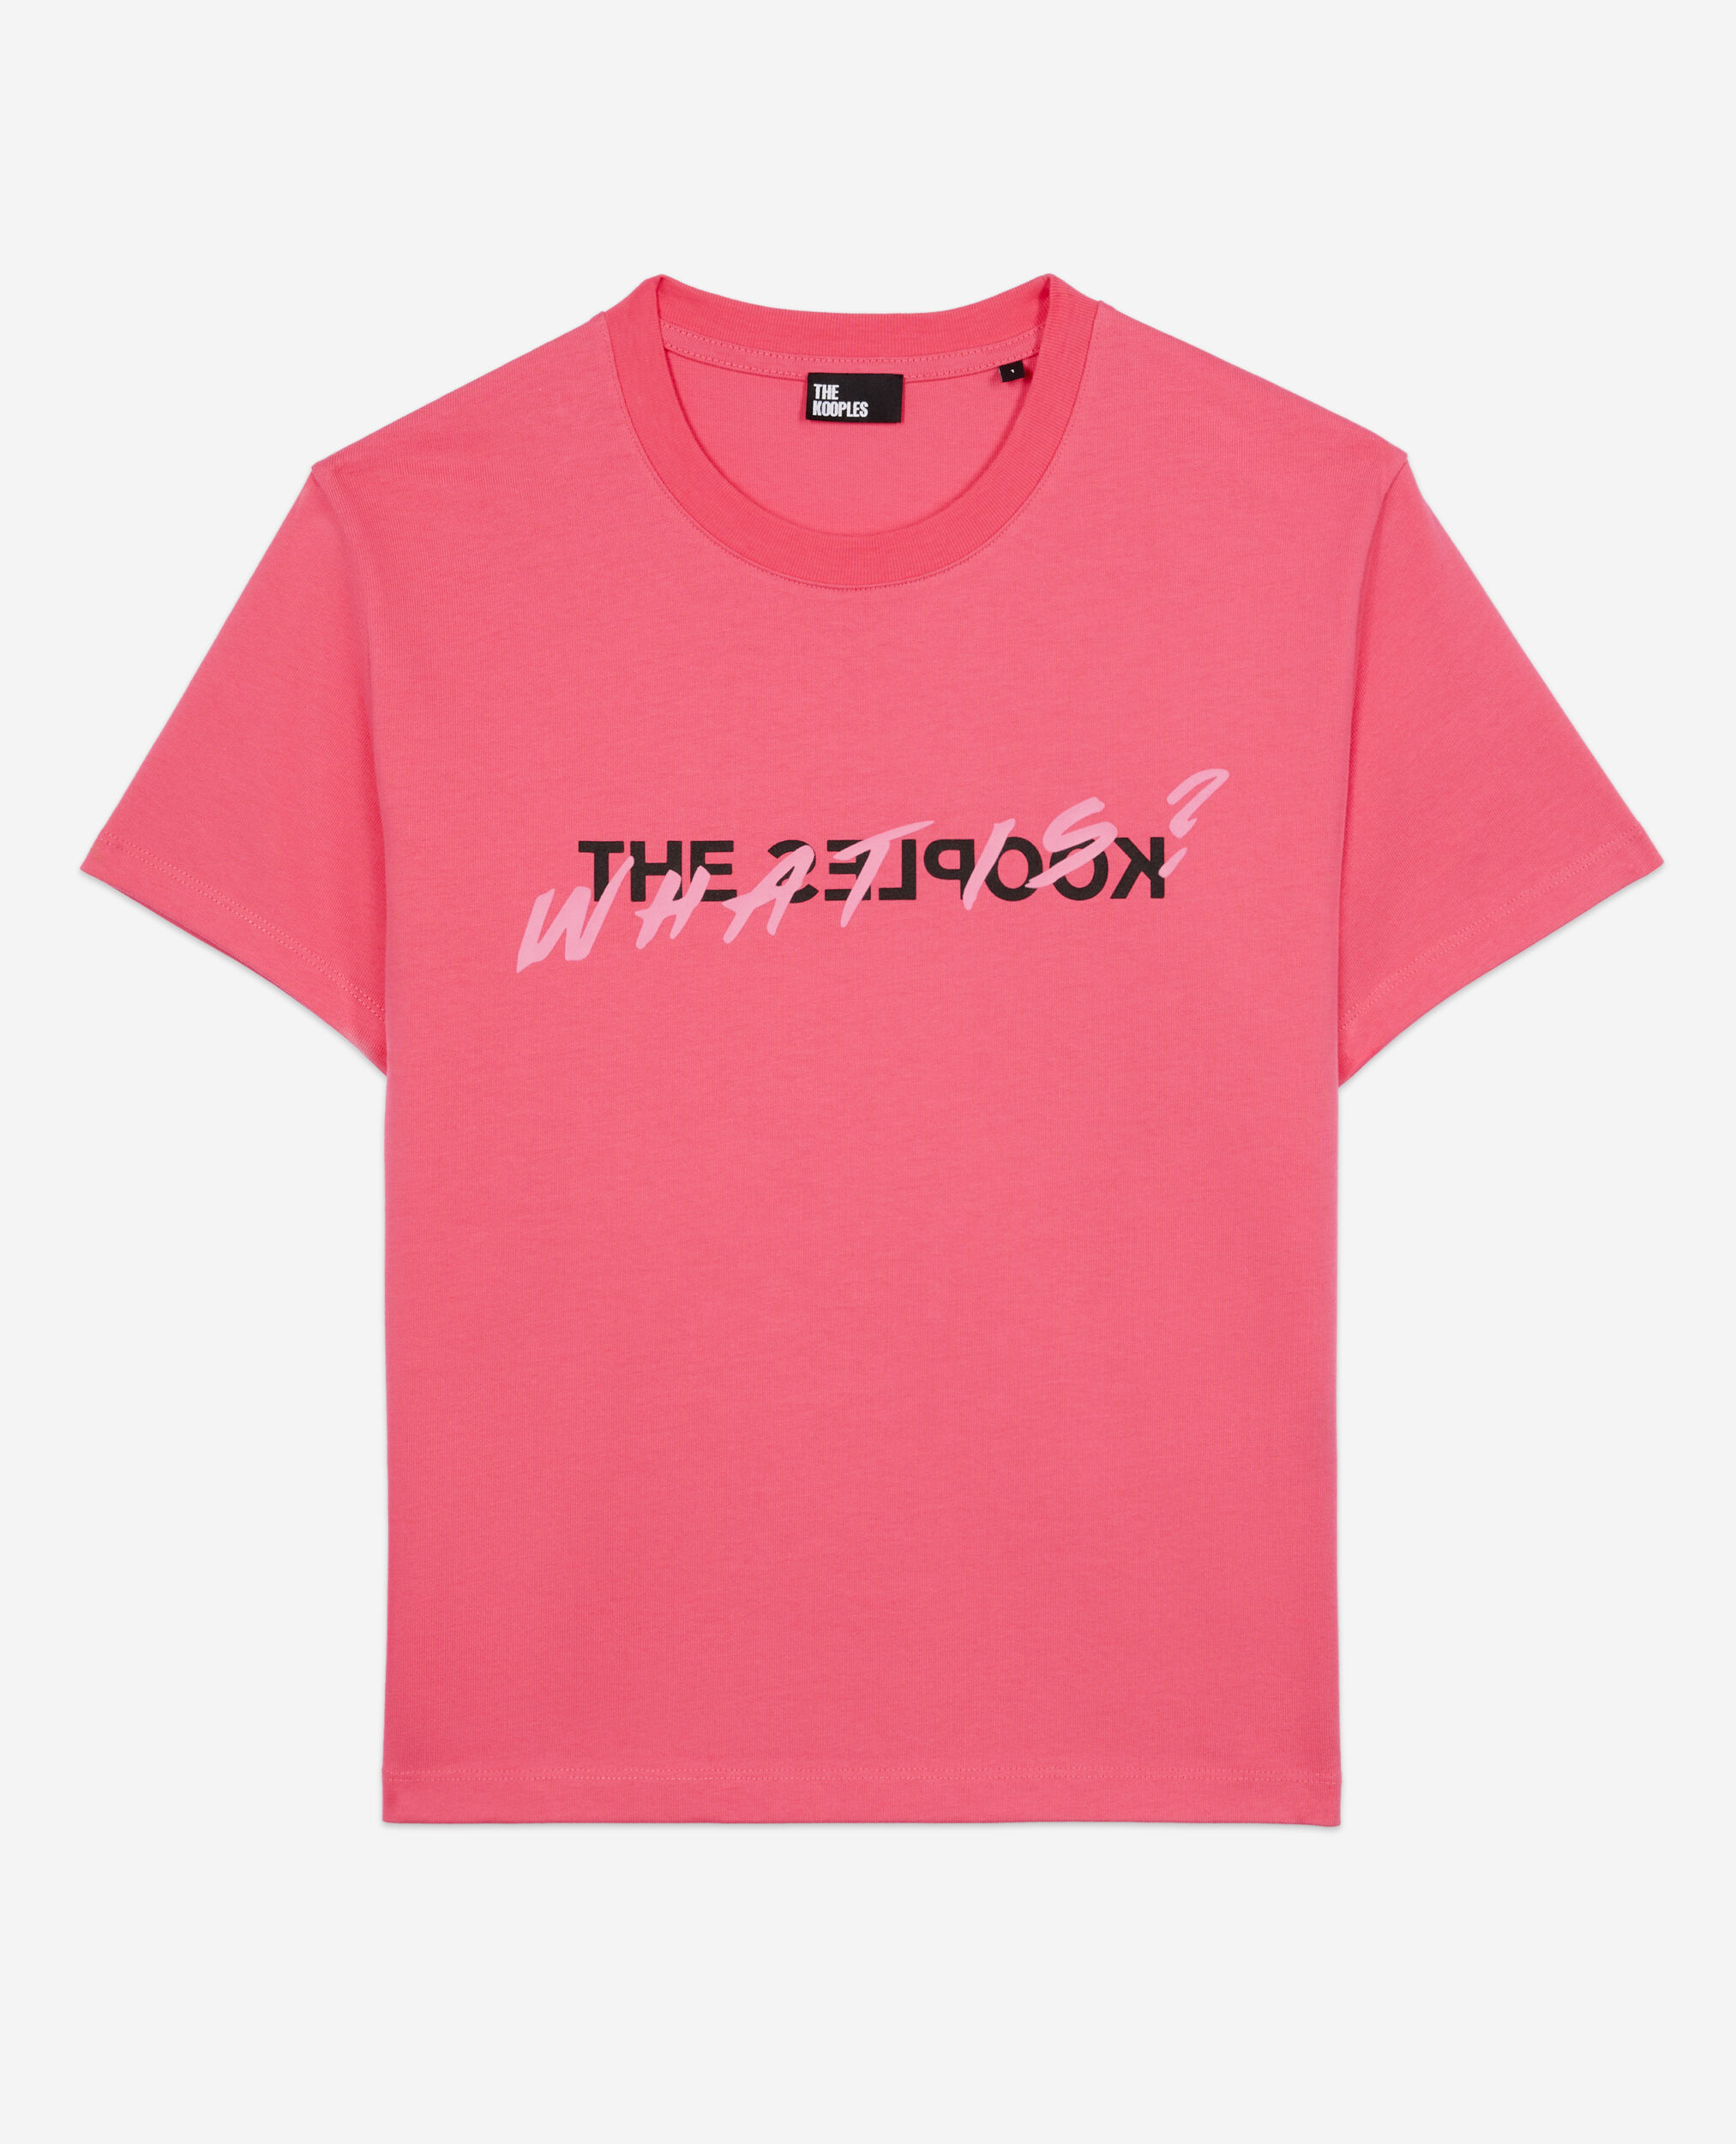 T-shirt What is fuchsia, RETRO PINK, hi-res image number null